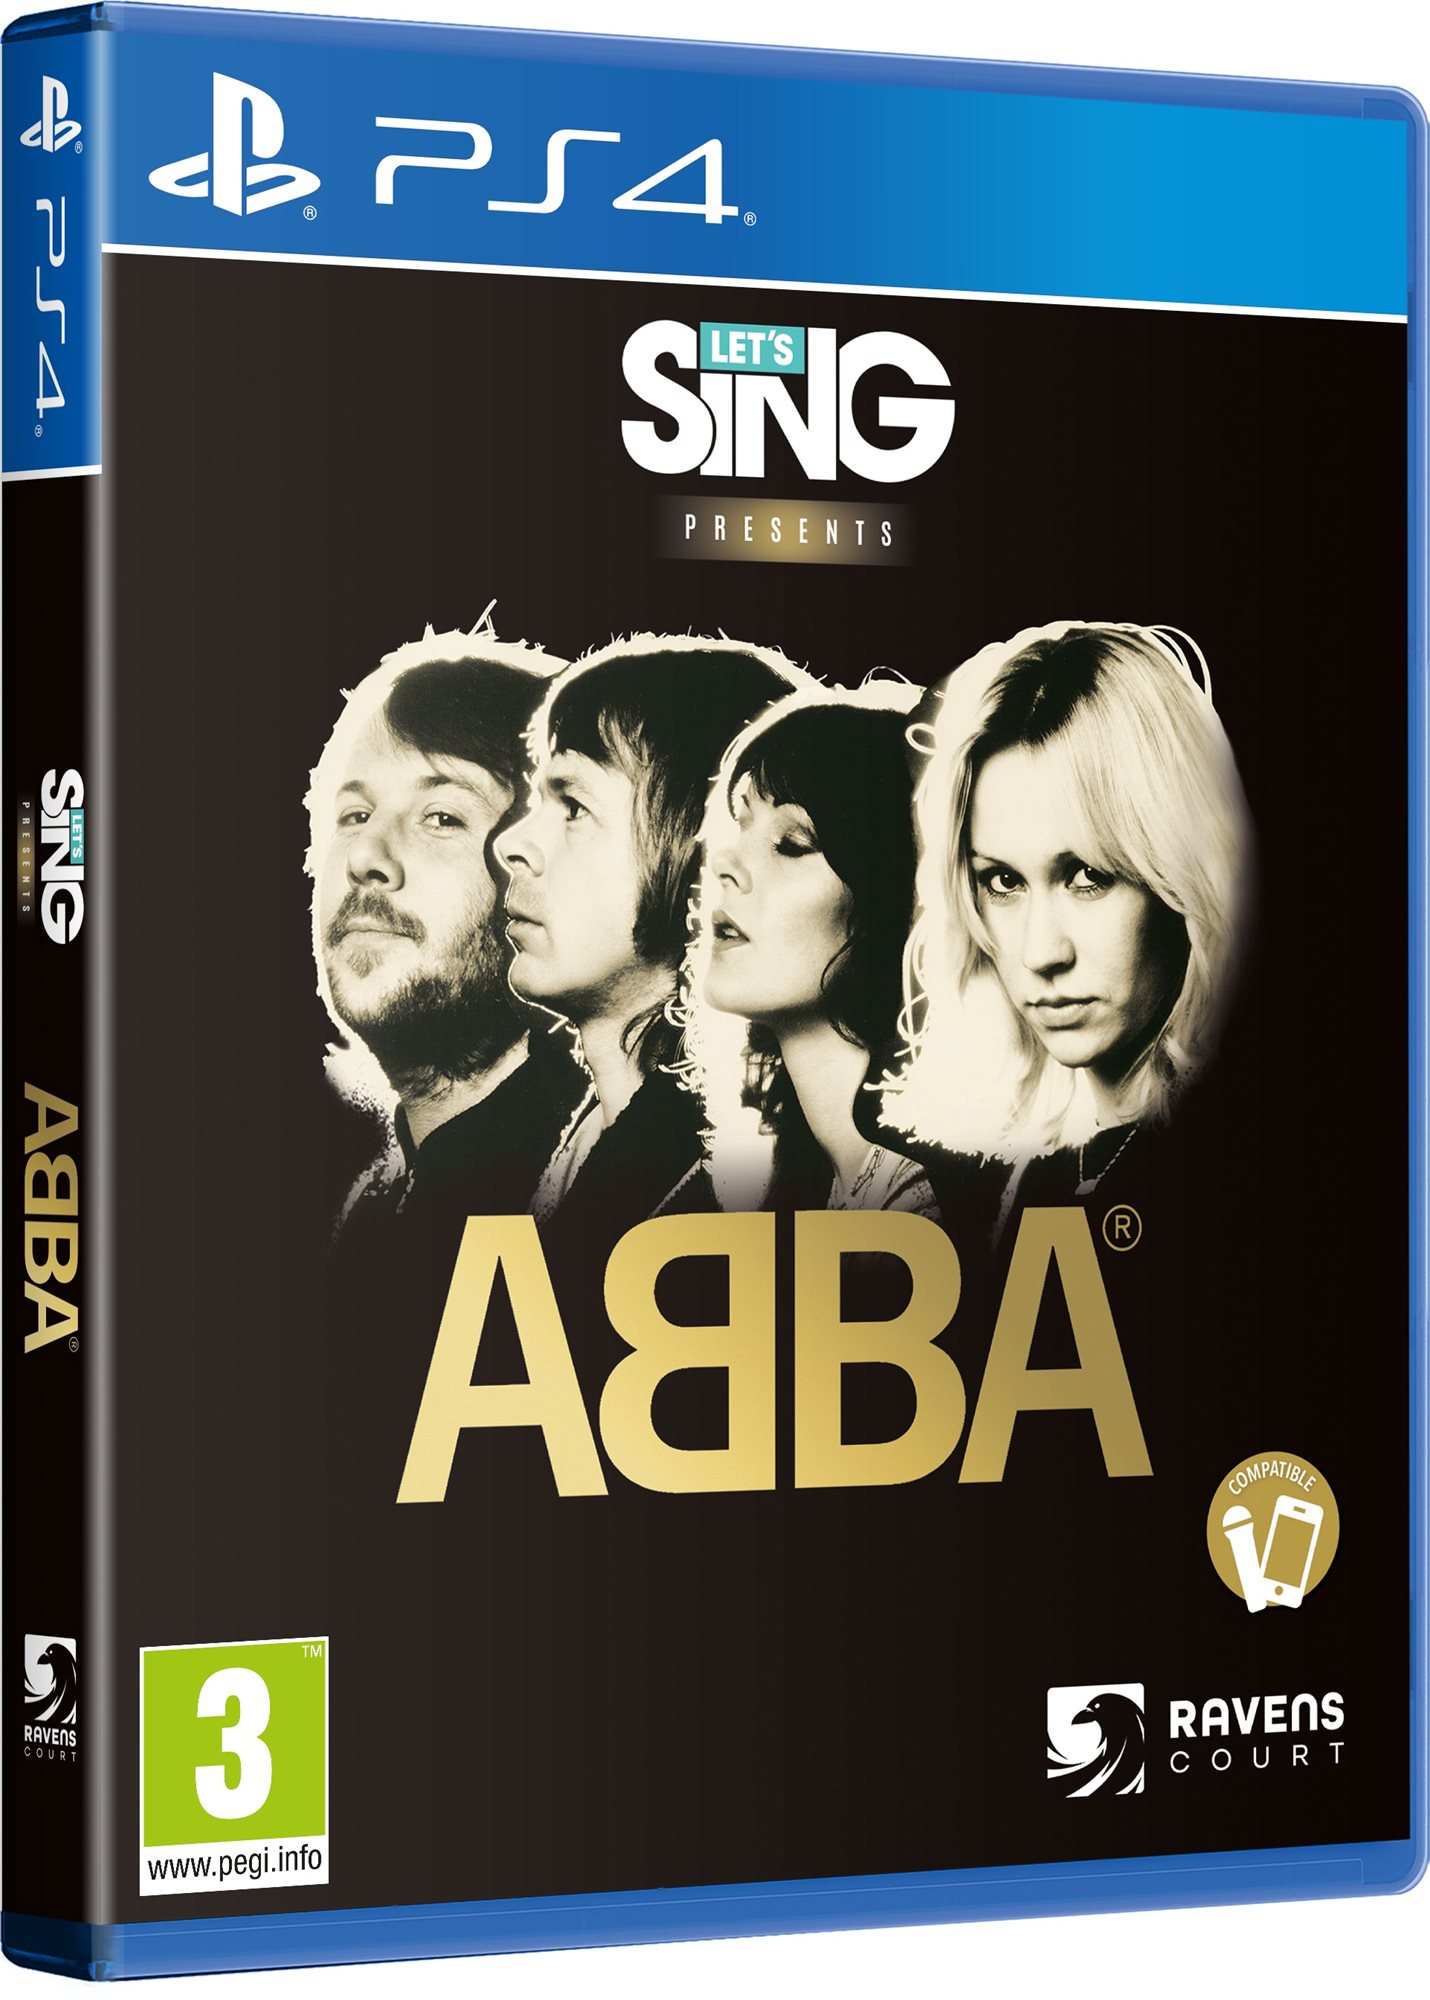 Lets Sing Presents ABBA - PS4